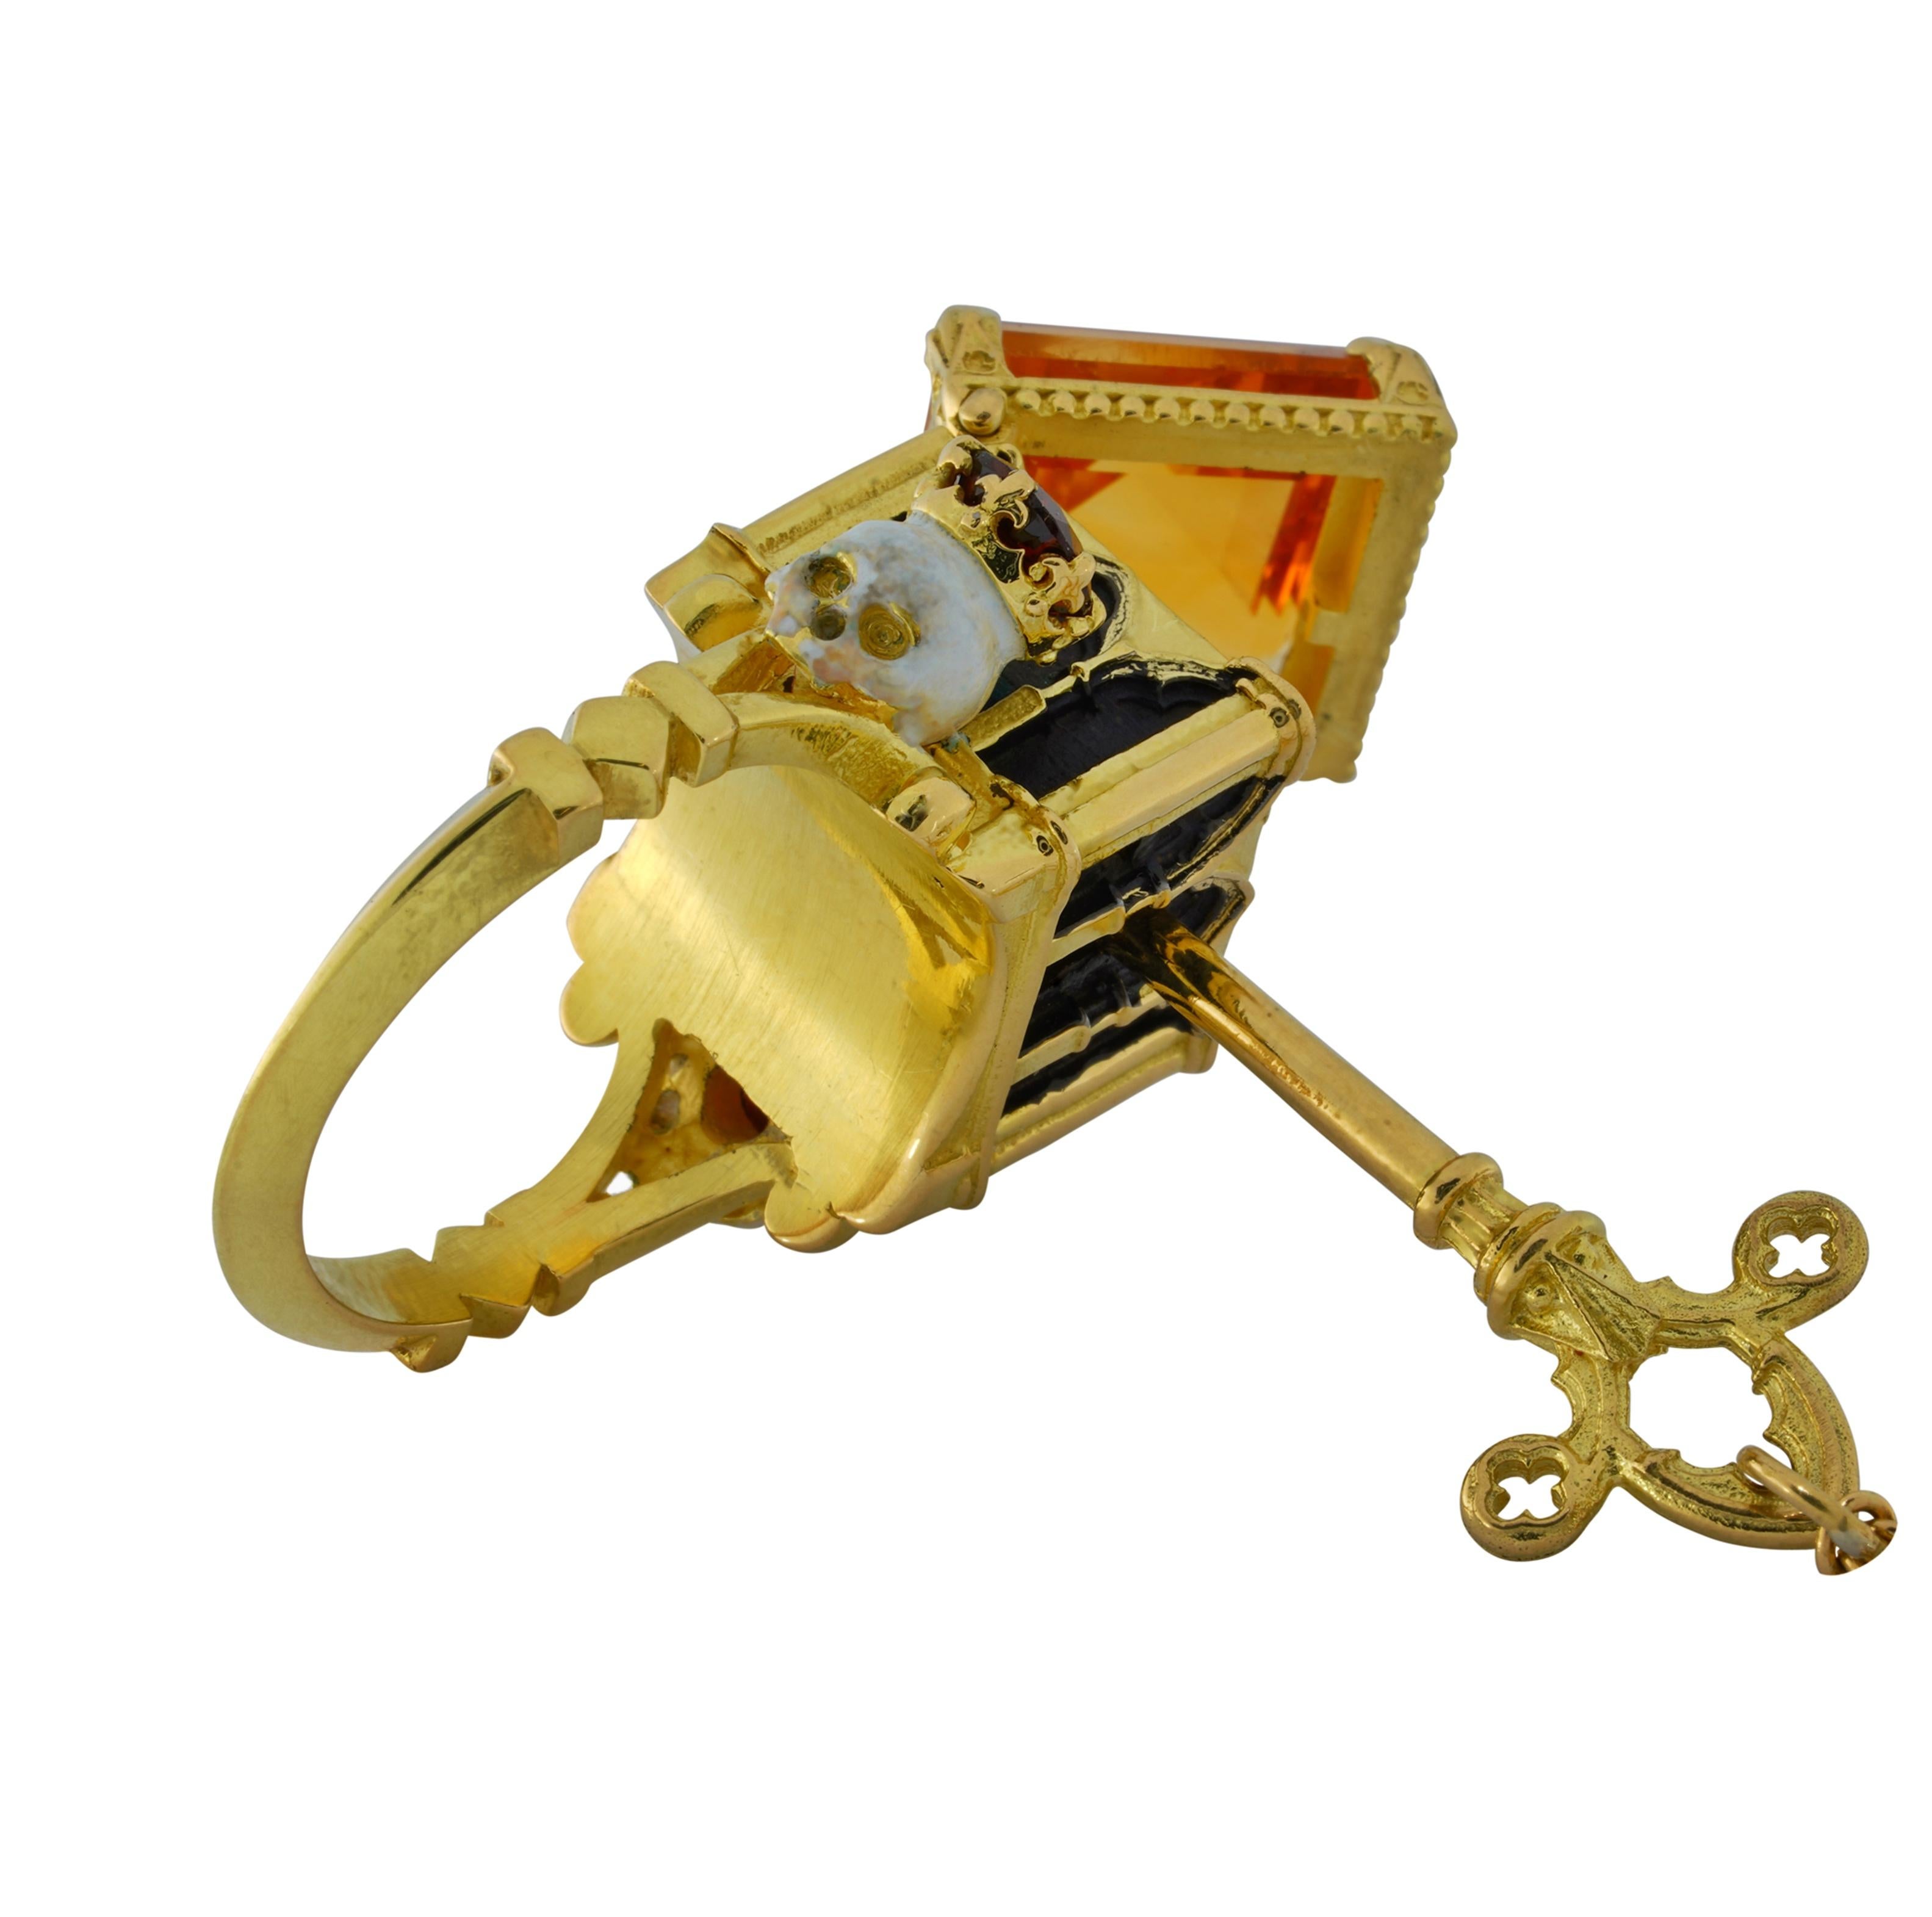 Square Cut Catacomb Saints Poison Chamber Ring in 18 Karat Gold with Citrine and Garnets